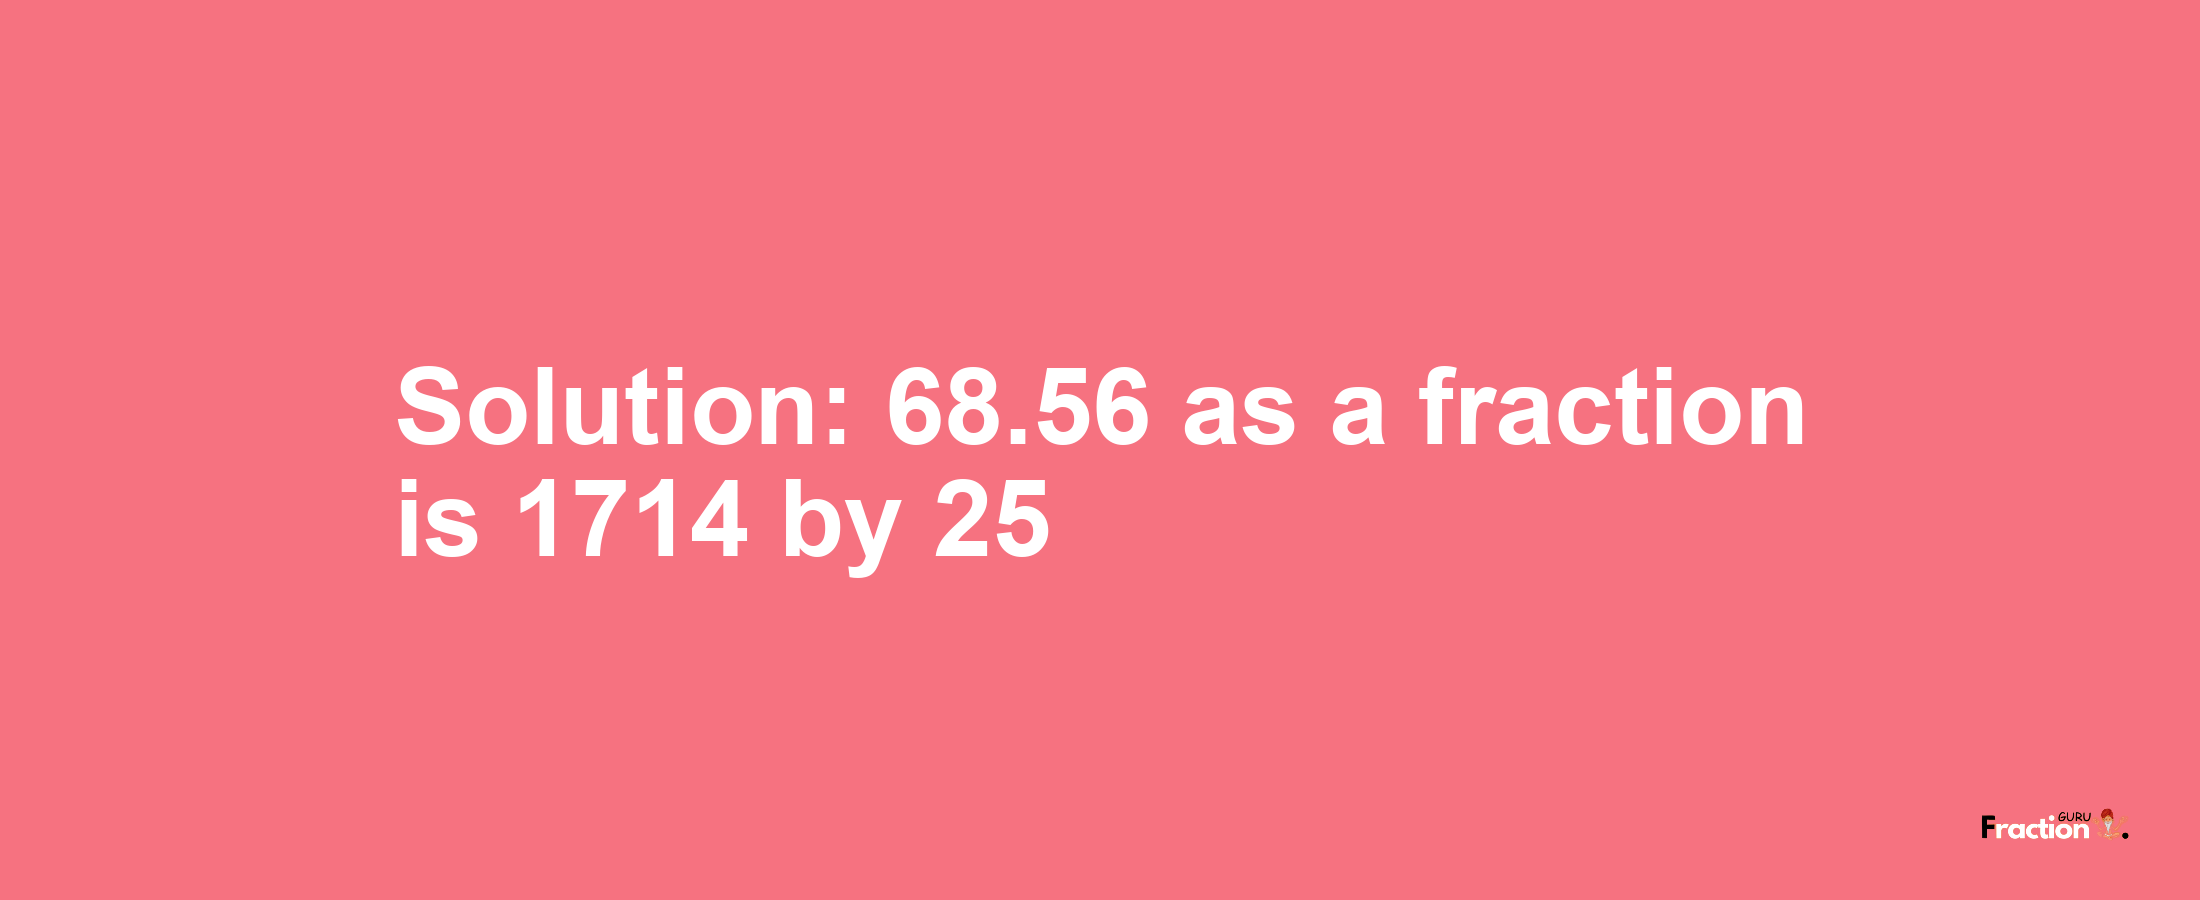 Solution:68.56 as a fraction is 1714/25